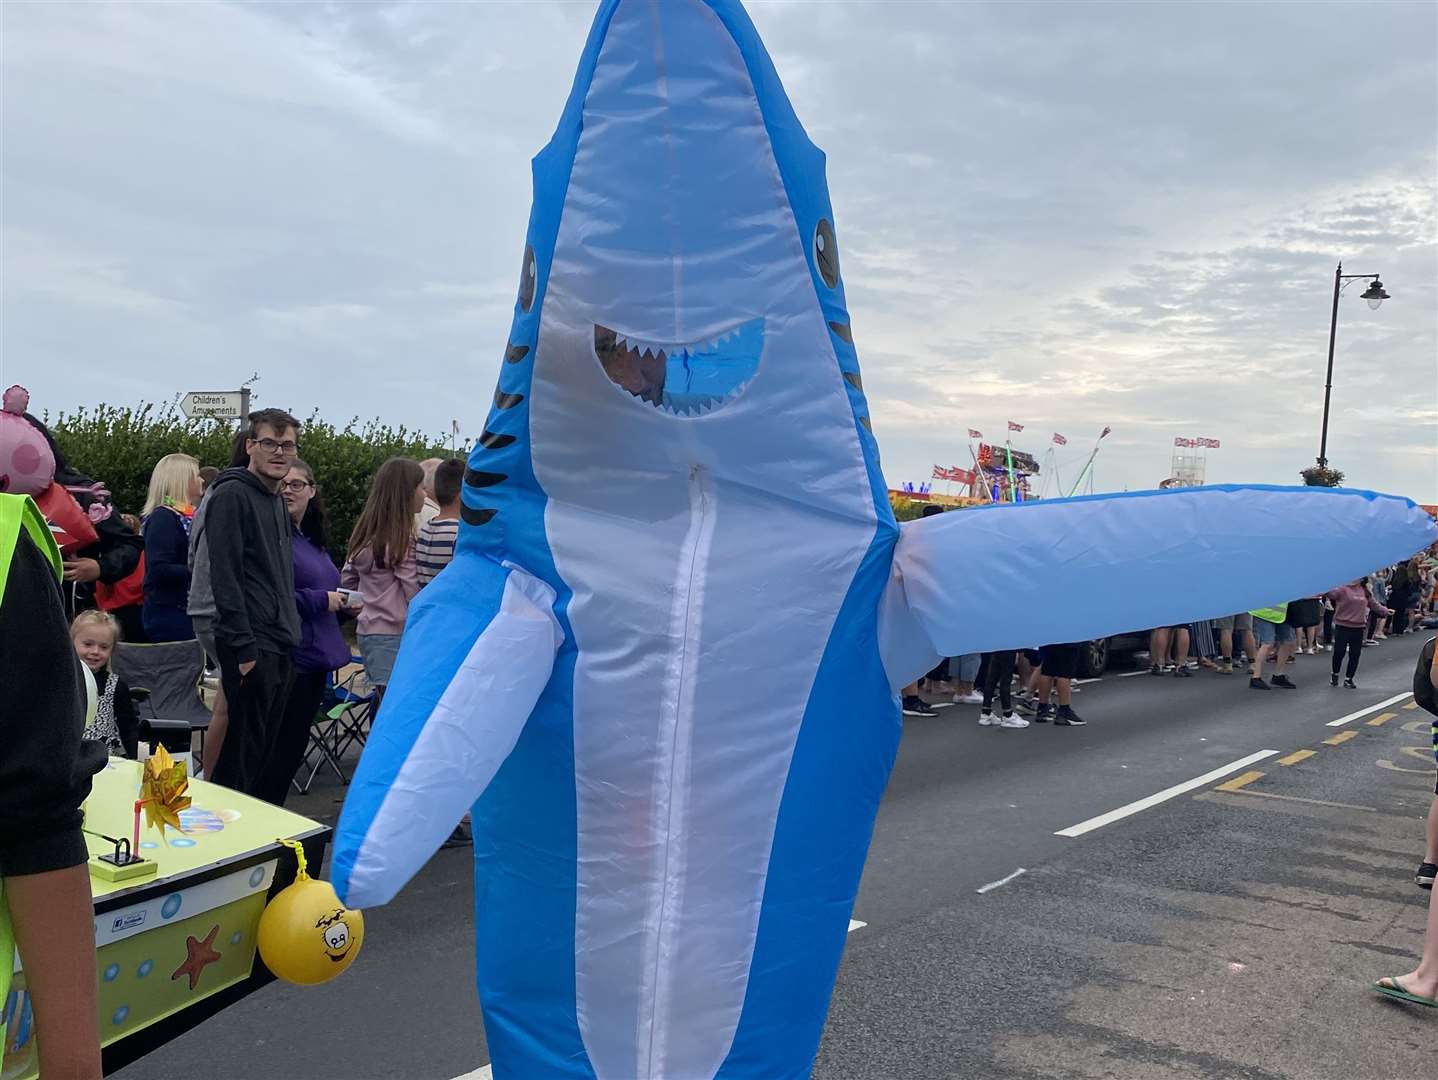 A shark was one of the many characters spotted in the parade